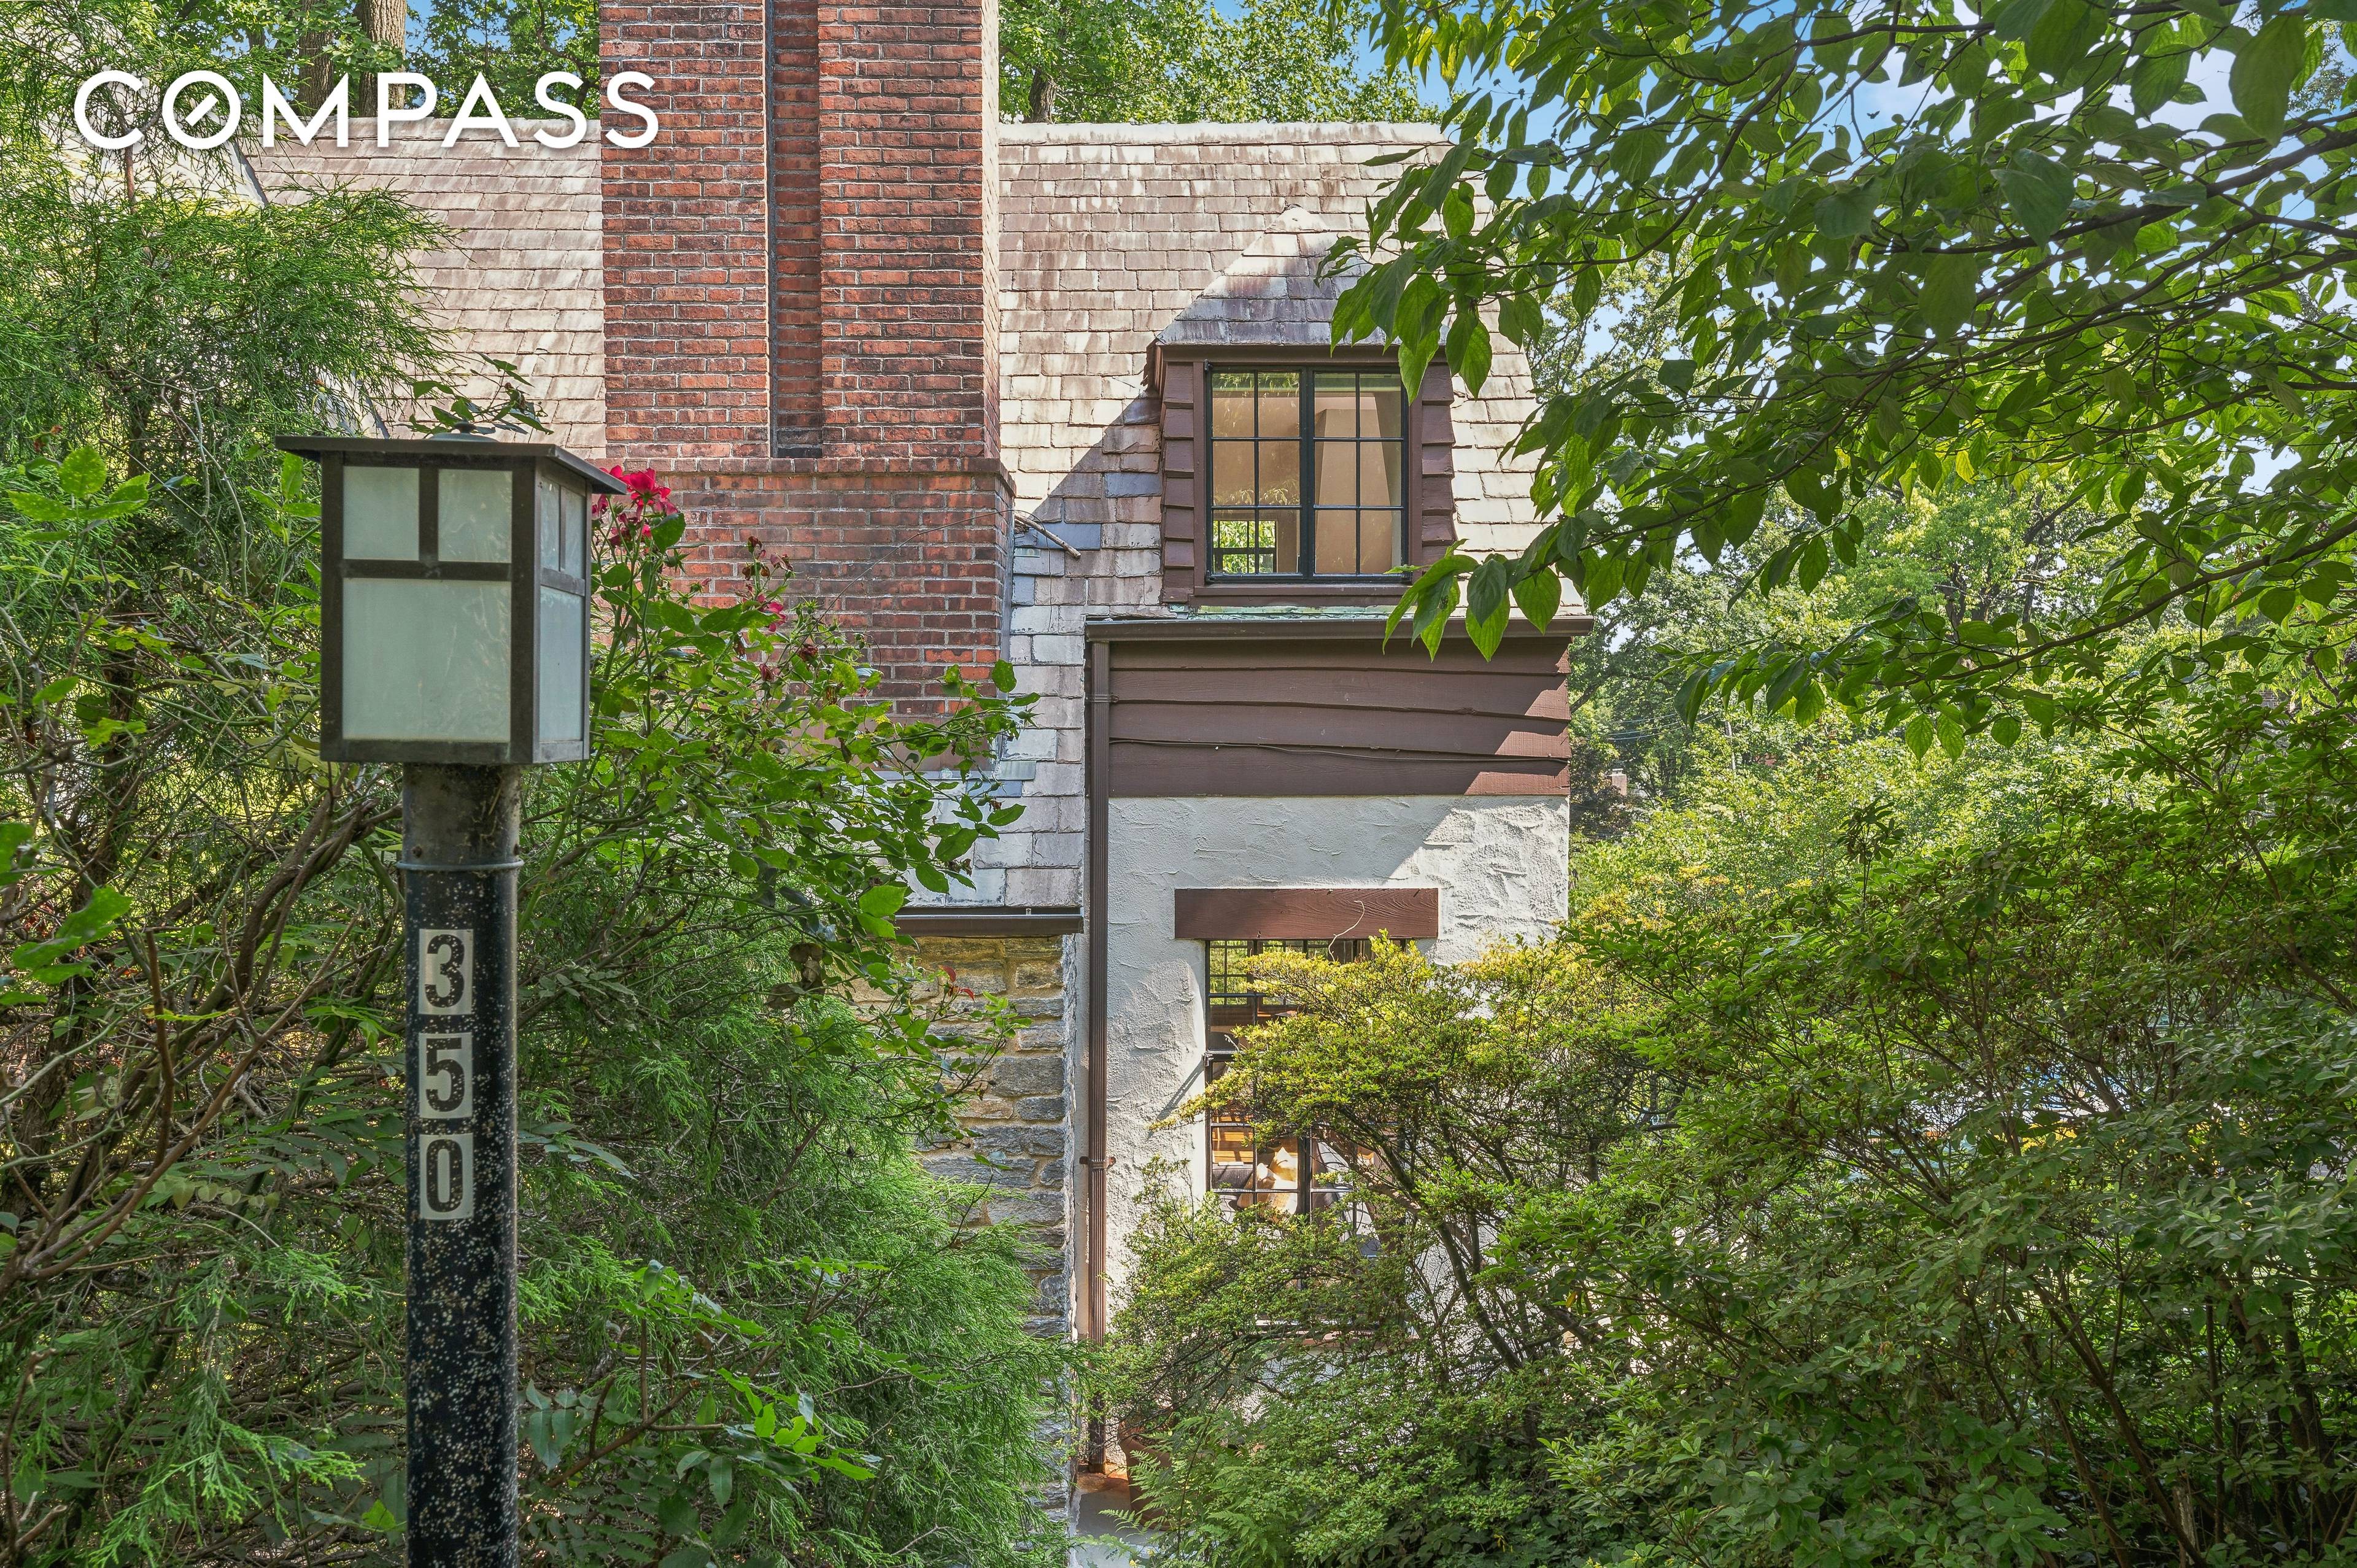 Welcome to this charming single family storybook Tudor located in the heart of Fieldston, a landmark district renowned for its tranquility and charm.